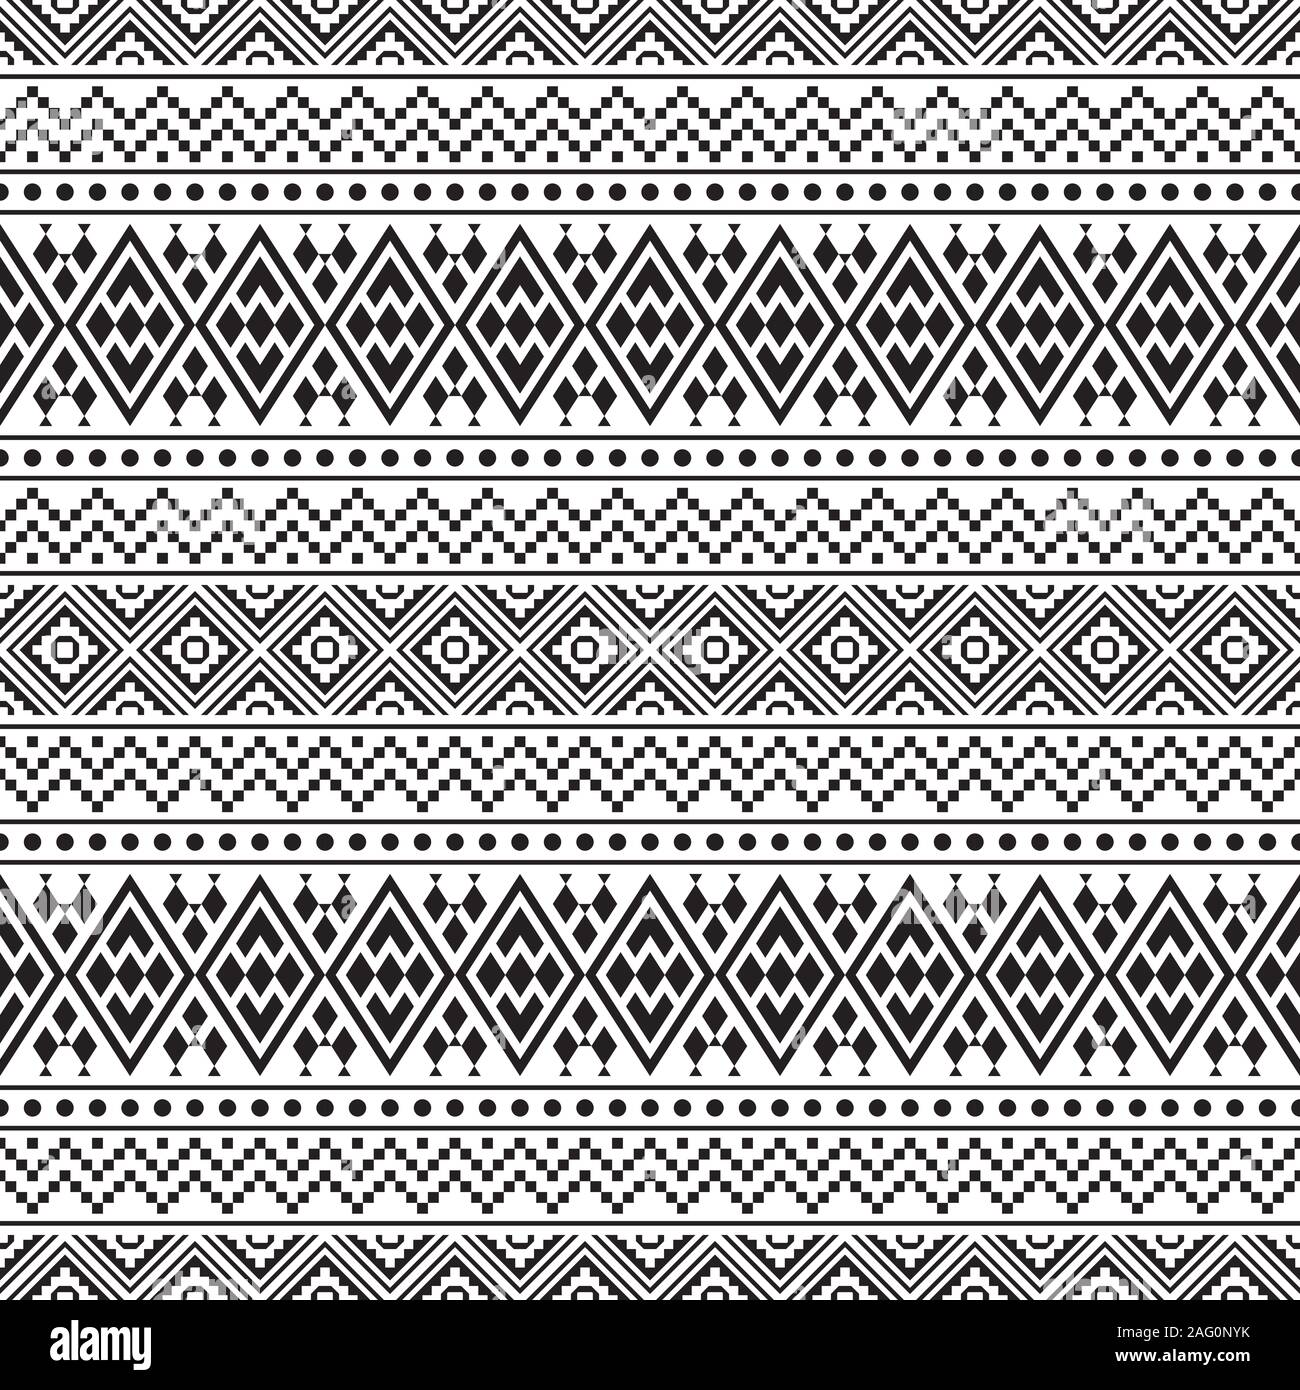 Seamless ethnic pattern in black and white color. Aztec tribal vector ...